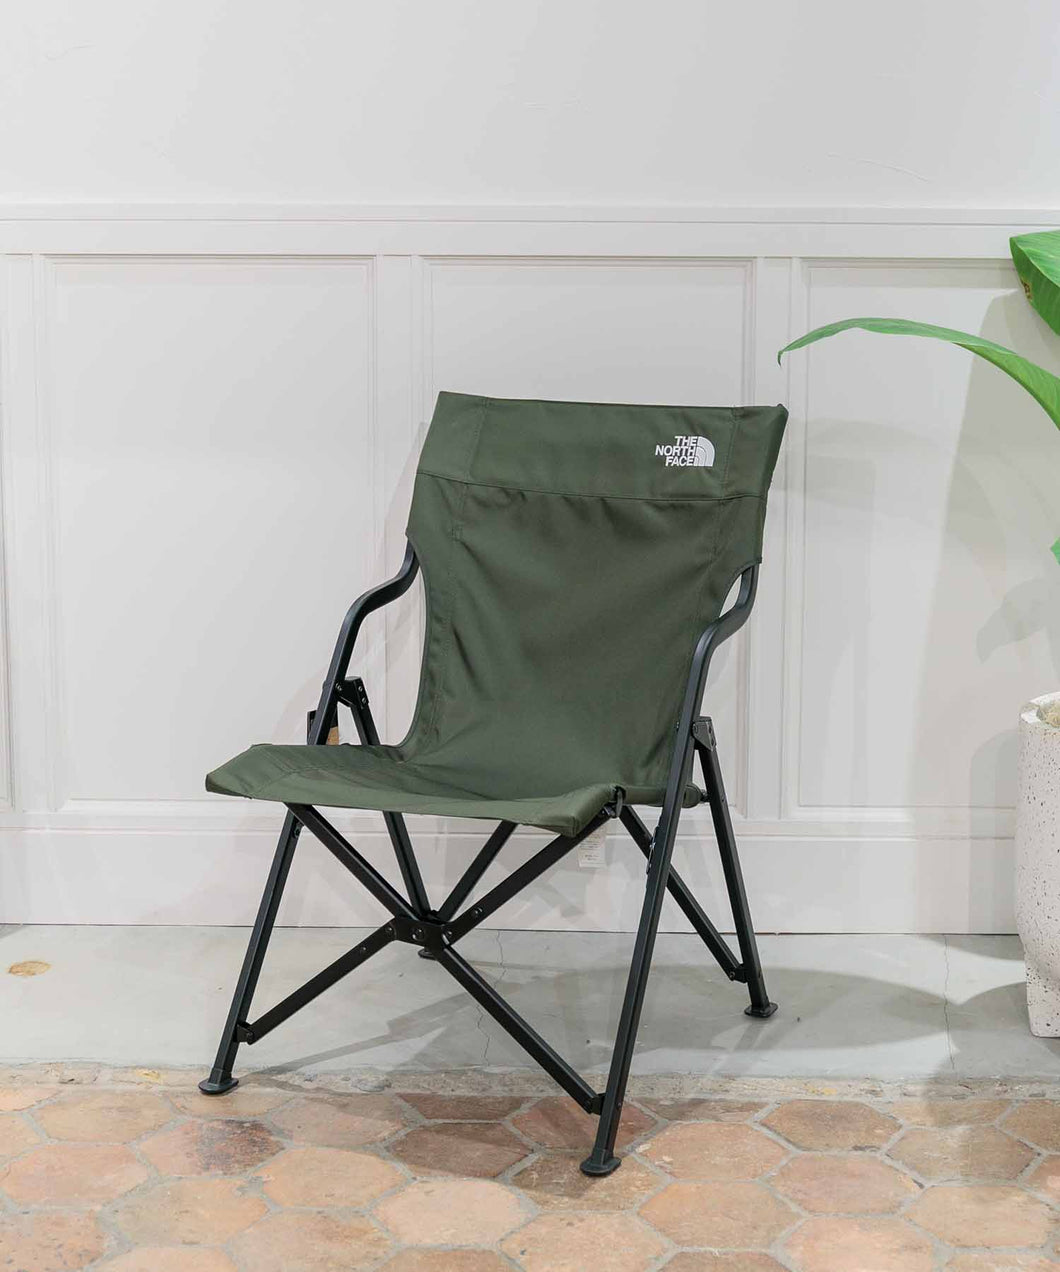 【MEN , WOMEN】THE NORTH FACE TNF Camp Chair Slim